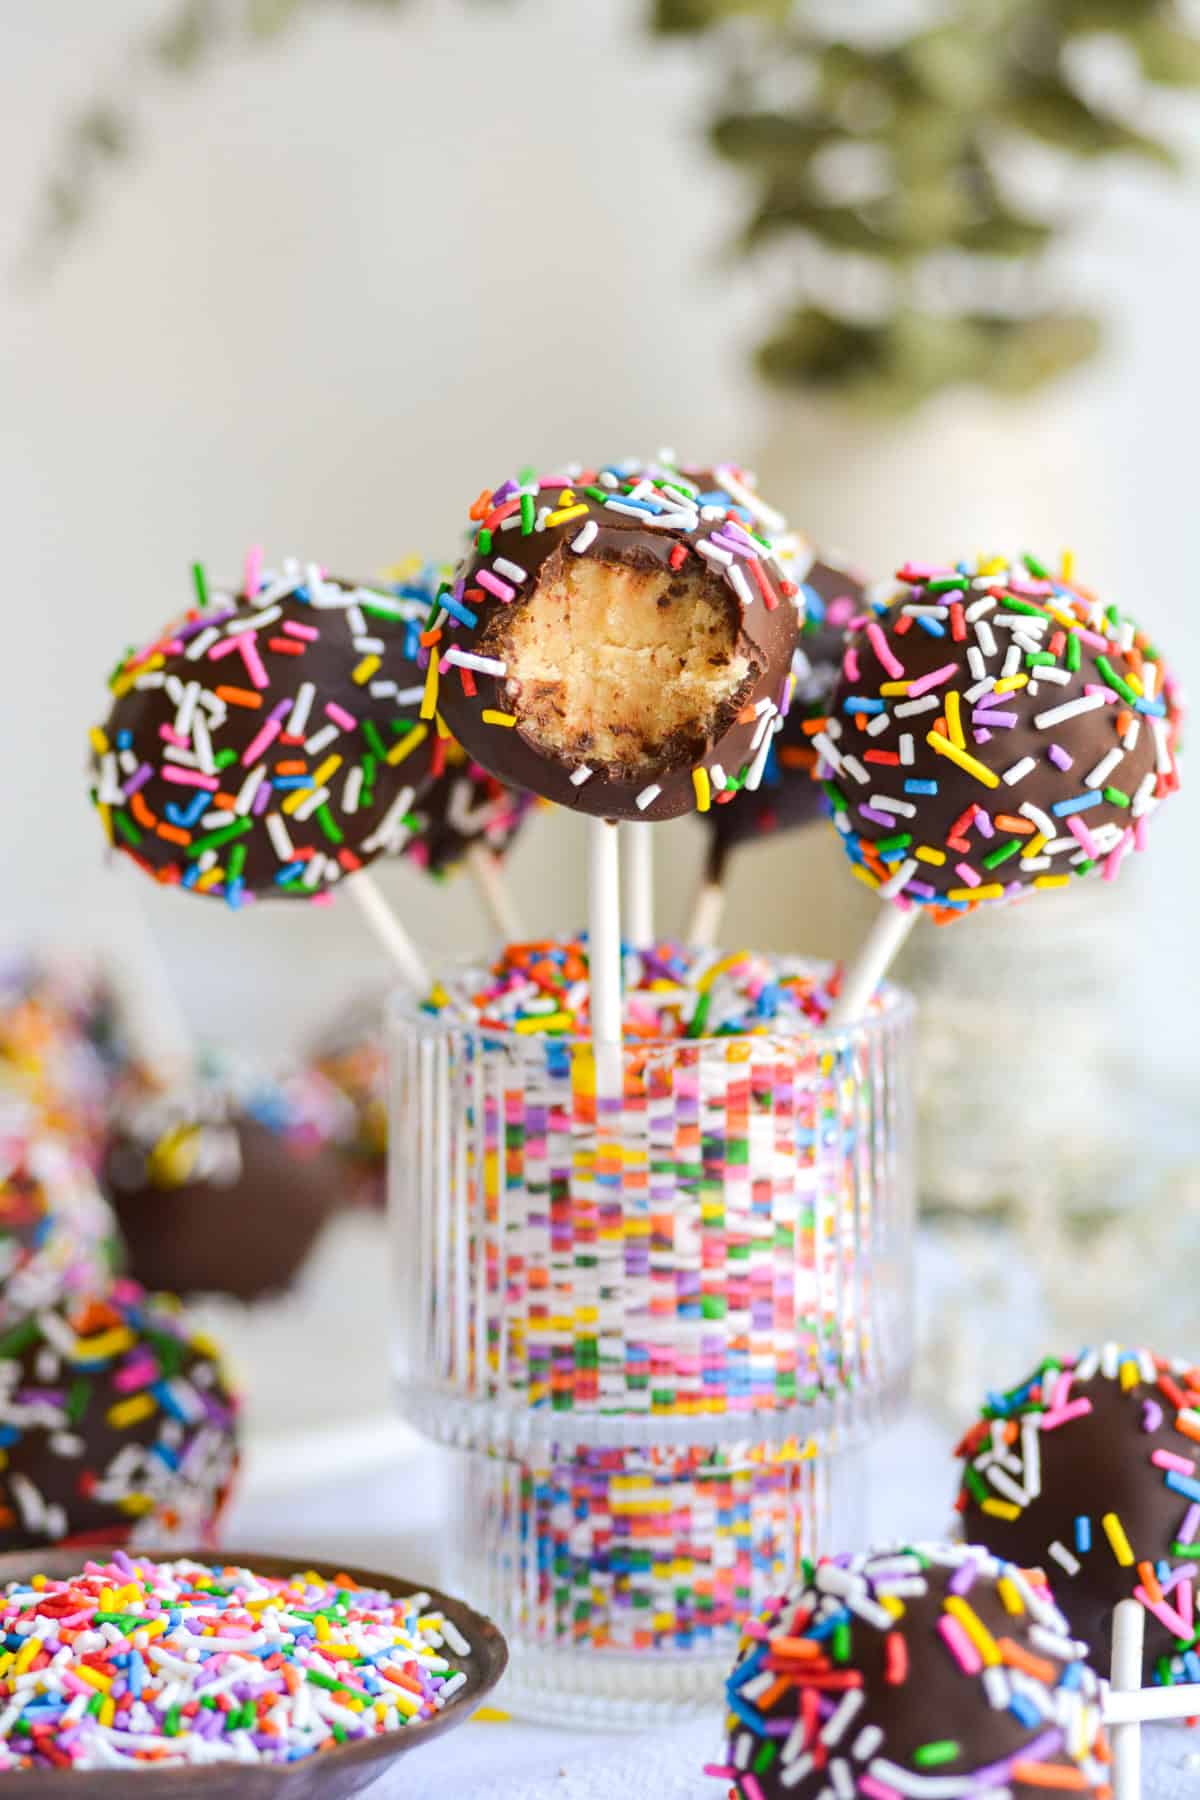 Vegan Cake Pops standing in a glass that is filled with rainbow sprinkles. The cake pop in front has a bite taken out of it.